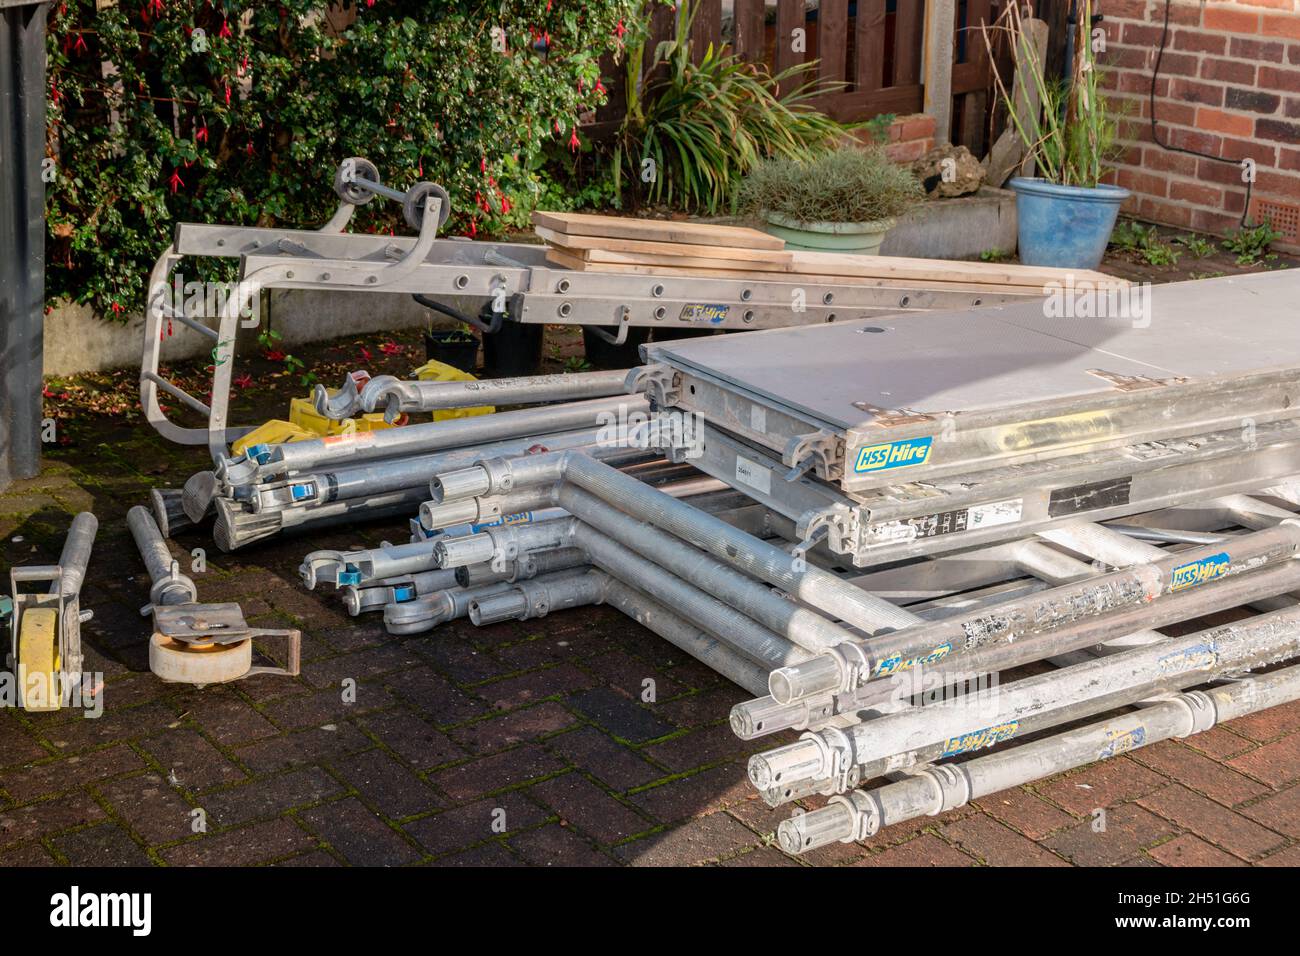 Pile of components of hired scaffolding or mobile platform work tower in domestic garden Stock Photo